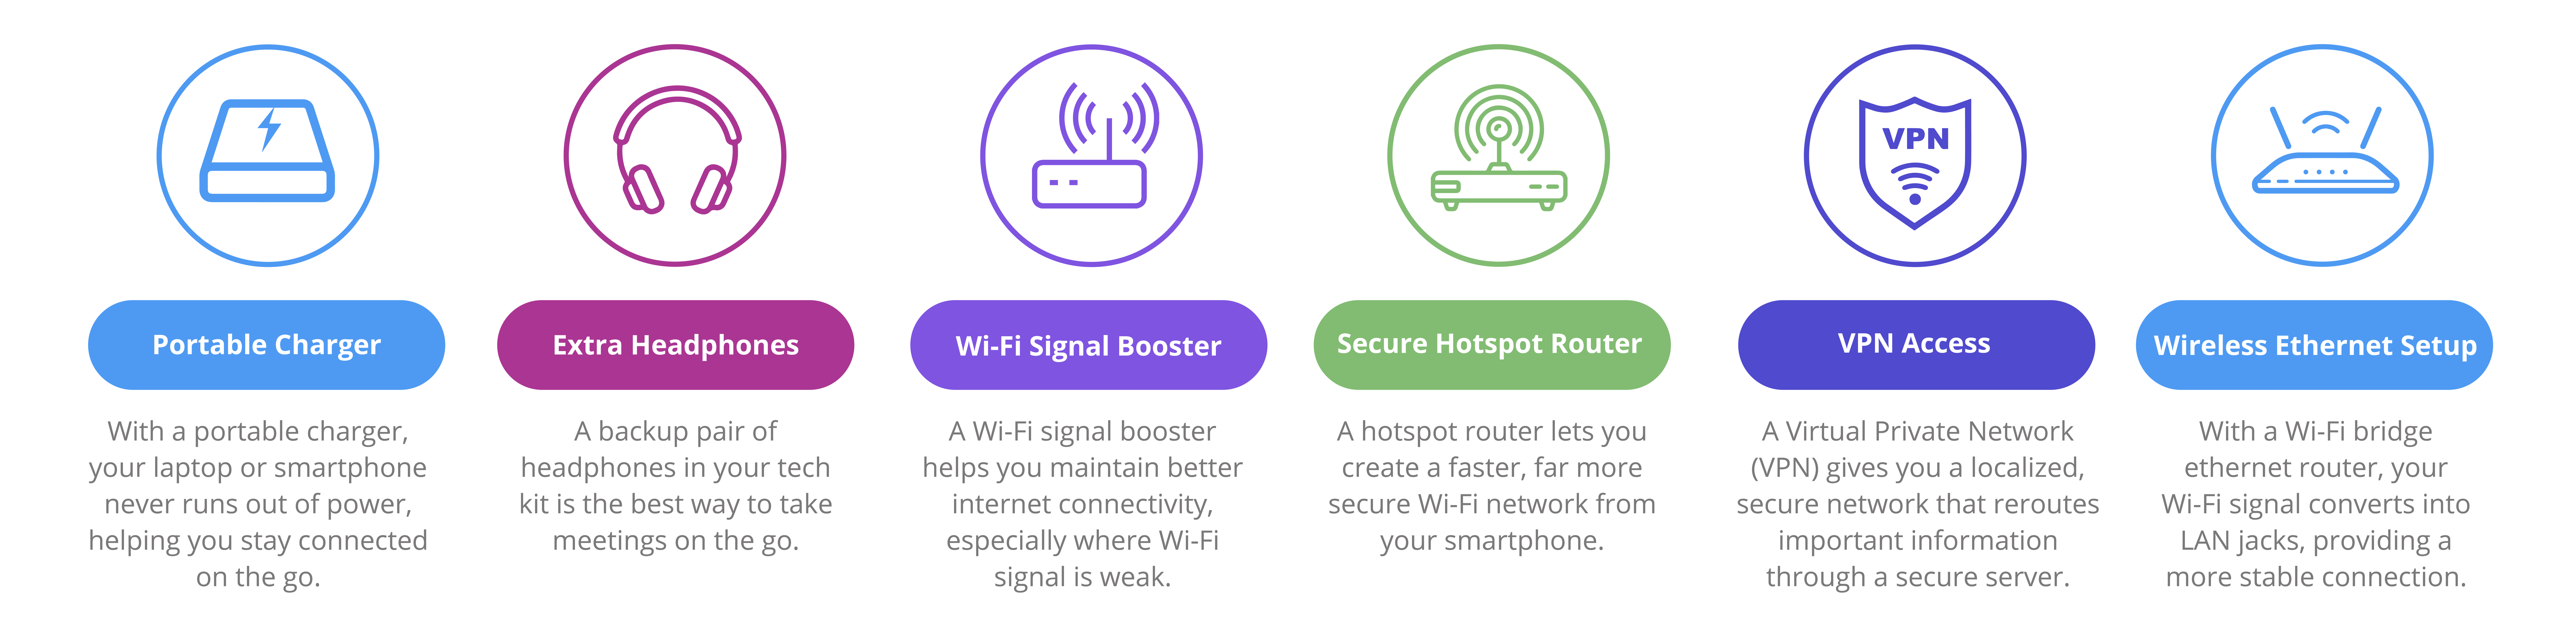 Infographic of remote tech kit including symbols and descriptions for portable charger, headphones, wifi signal booster, hotspot router, VPN access and ethernet set up 